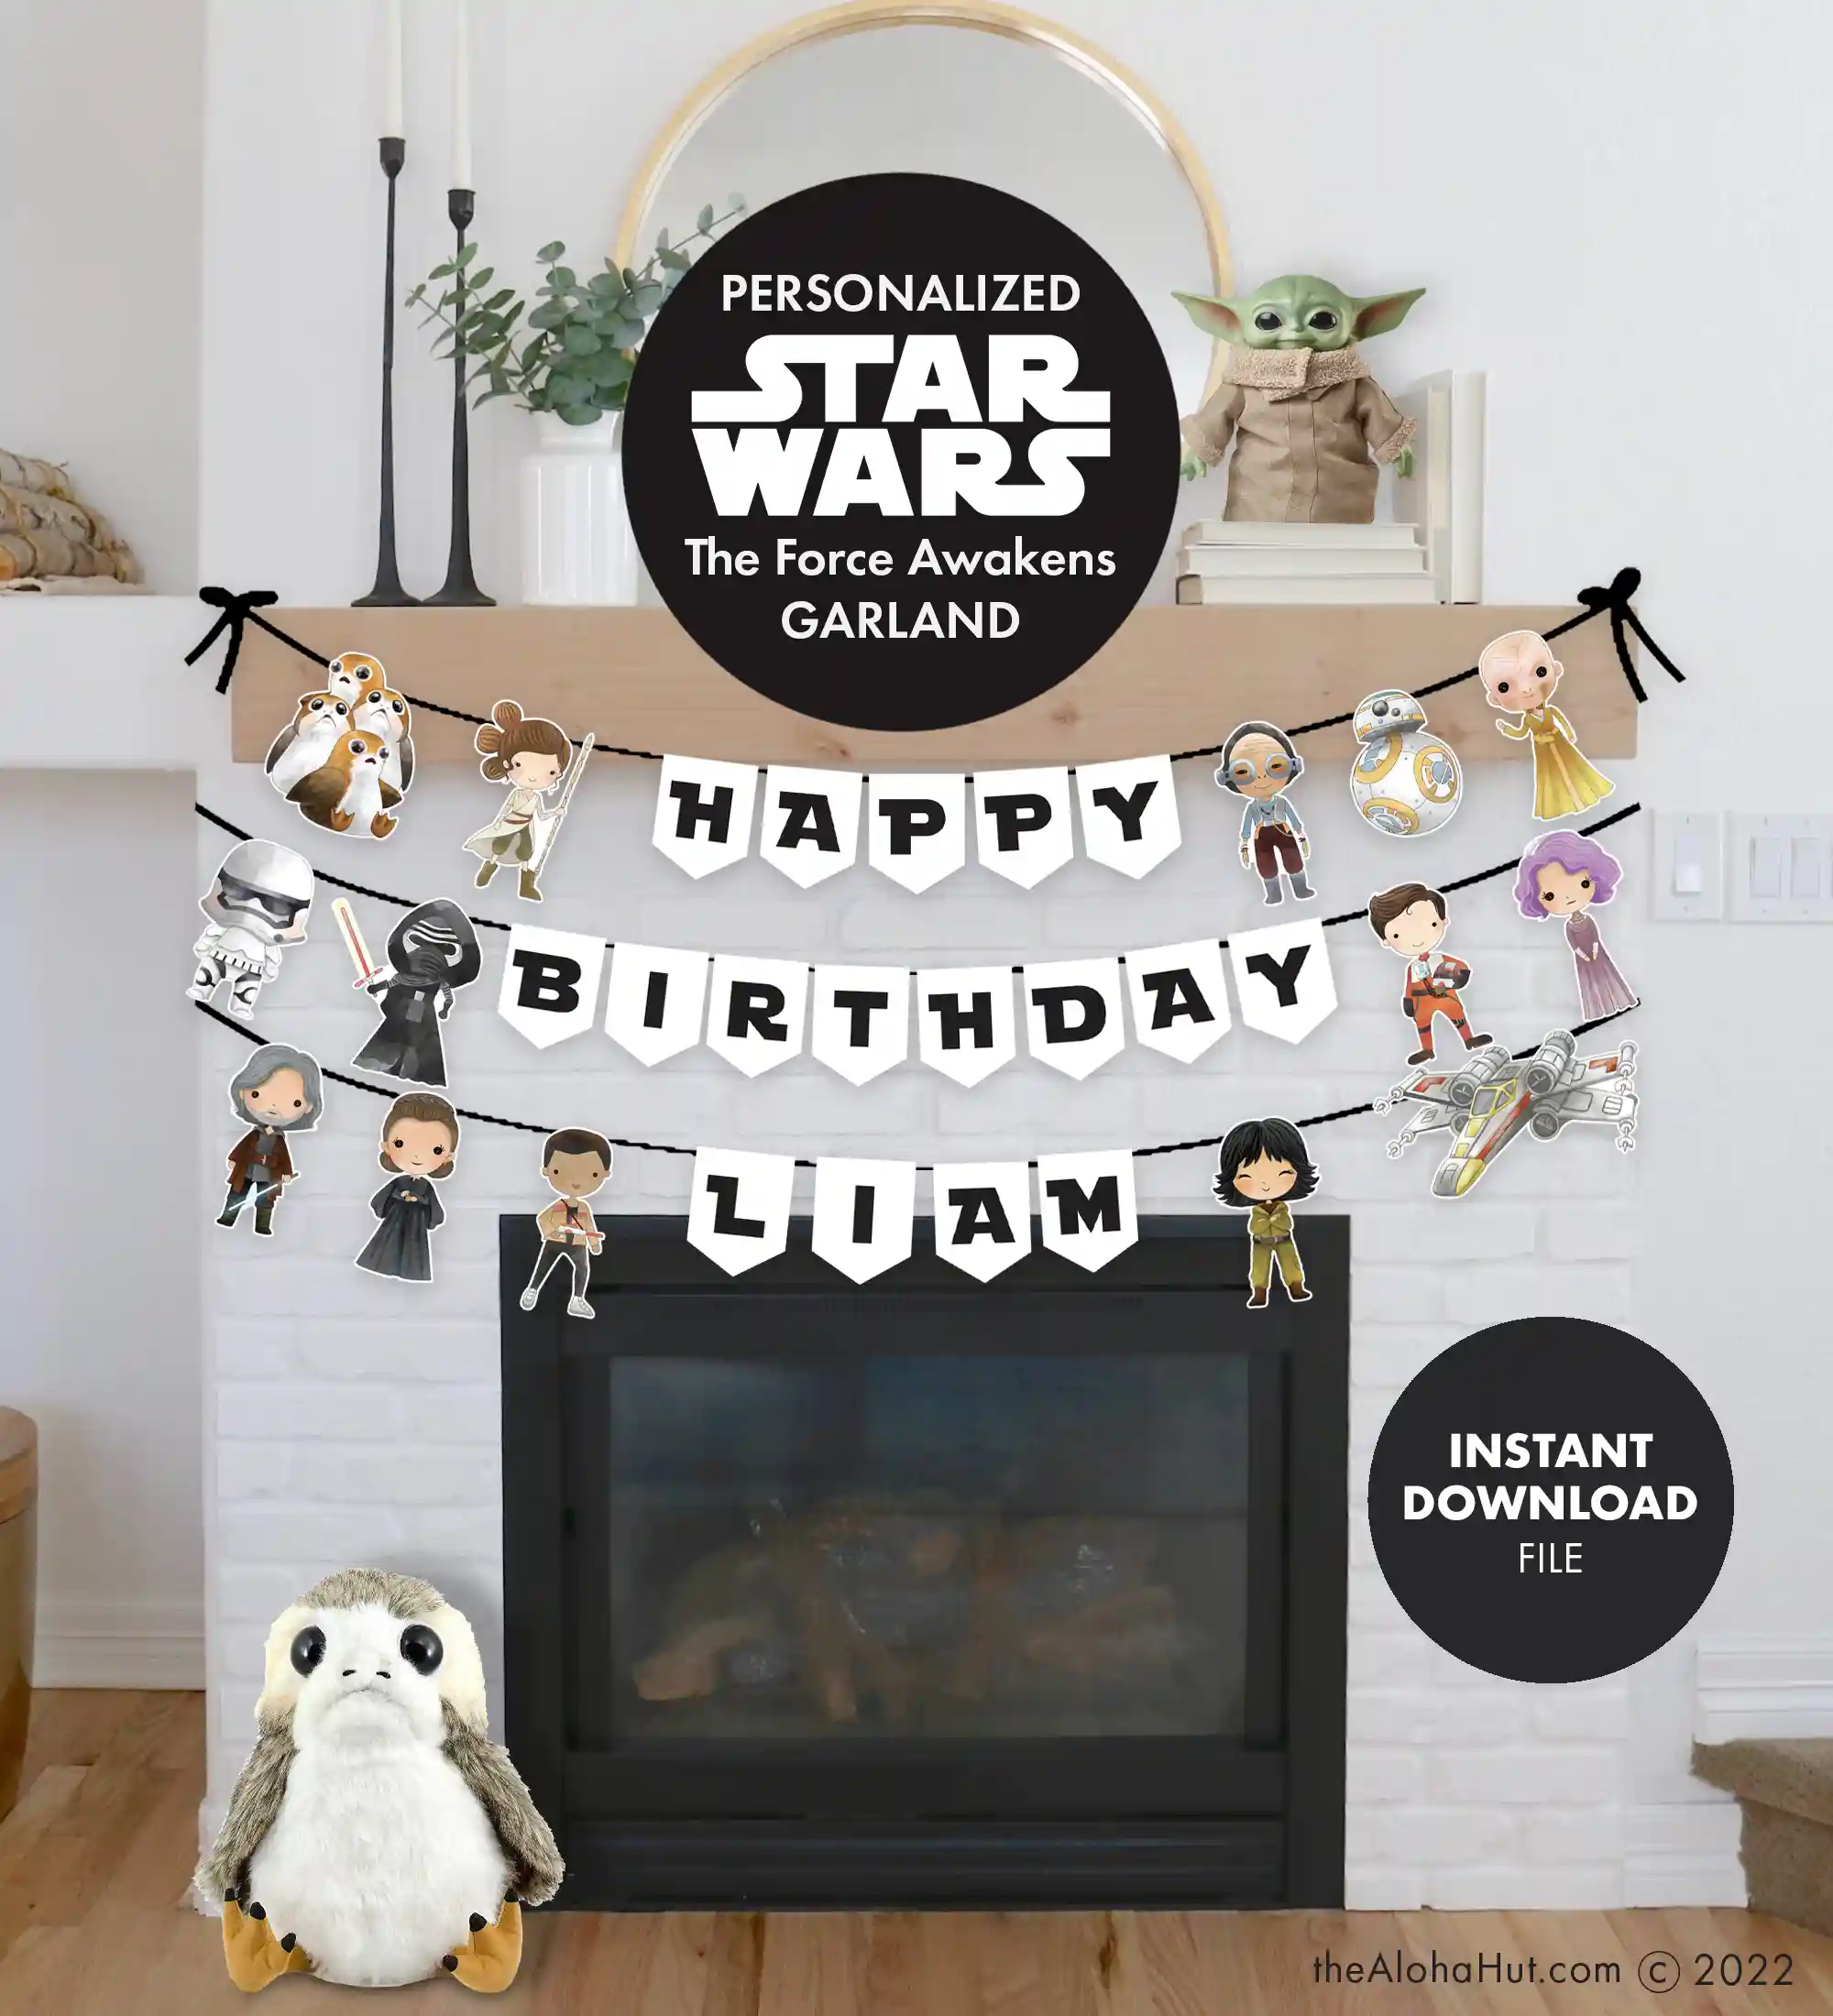 Star Wars party ideas, activities, birthday party games, decorations, and prints. Ideas and tips and tricks for throwing the best Star Wars themed kids birthday party, baby shower, or one with the force celebration. Includes Star Wars printable games, decorations (cupcake toppers, banners, gift tags, characters) and Star Wars party games (BINGO, scavenger hunt, pin the lightsaber on Yoda or Darth Vader). Personalized Star Wars Happy Birthday Banner and the Force Awakens characters.